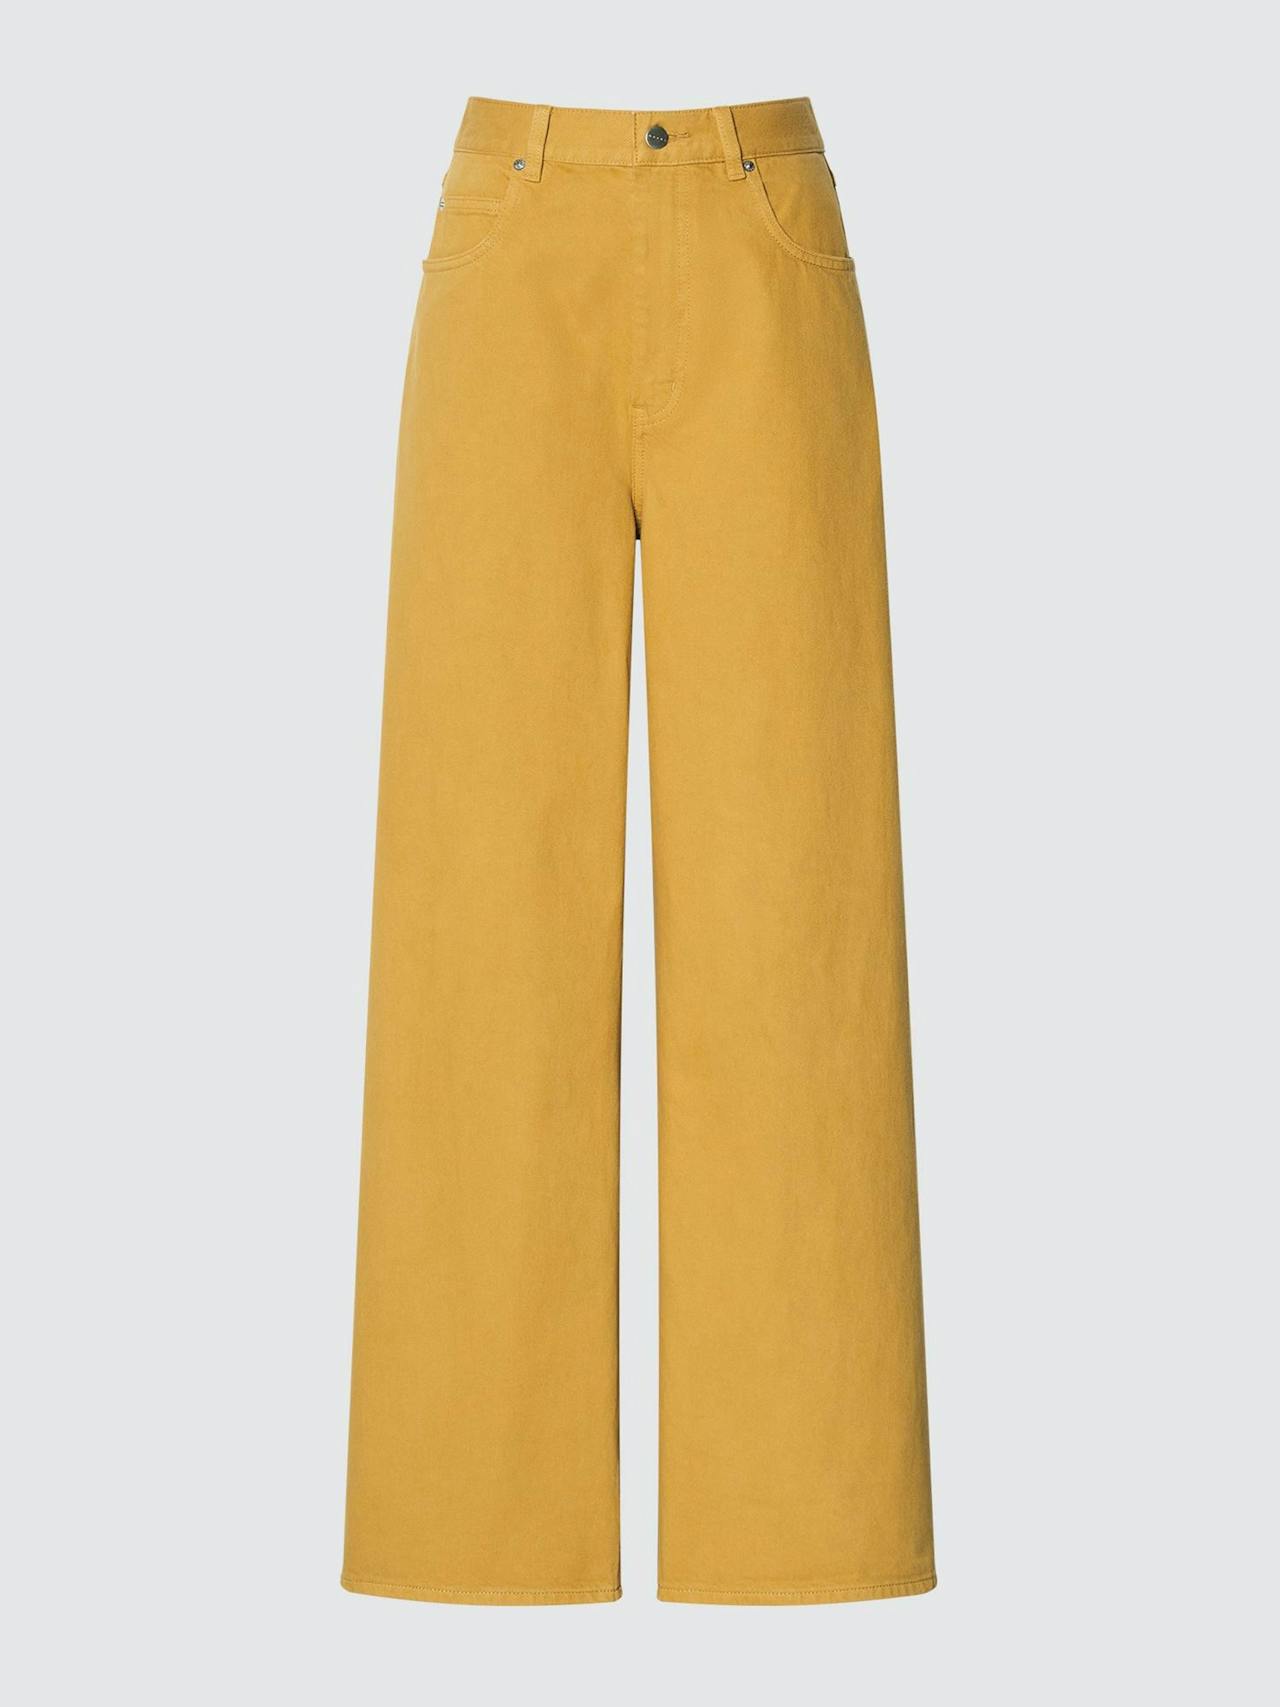 Baggy yellow jeans